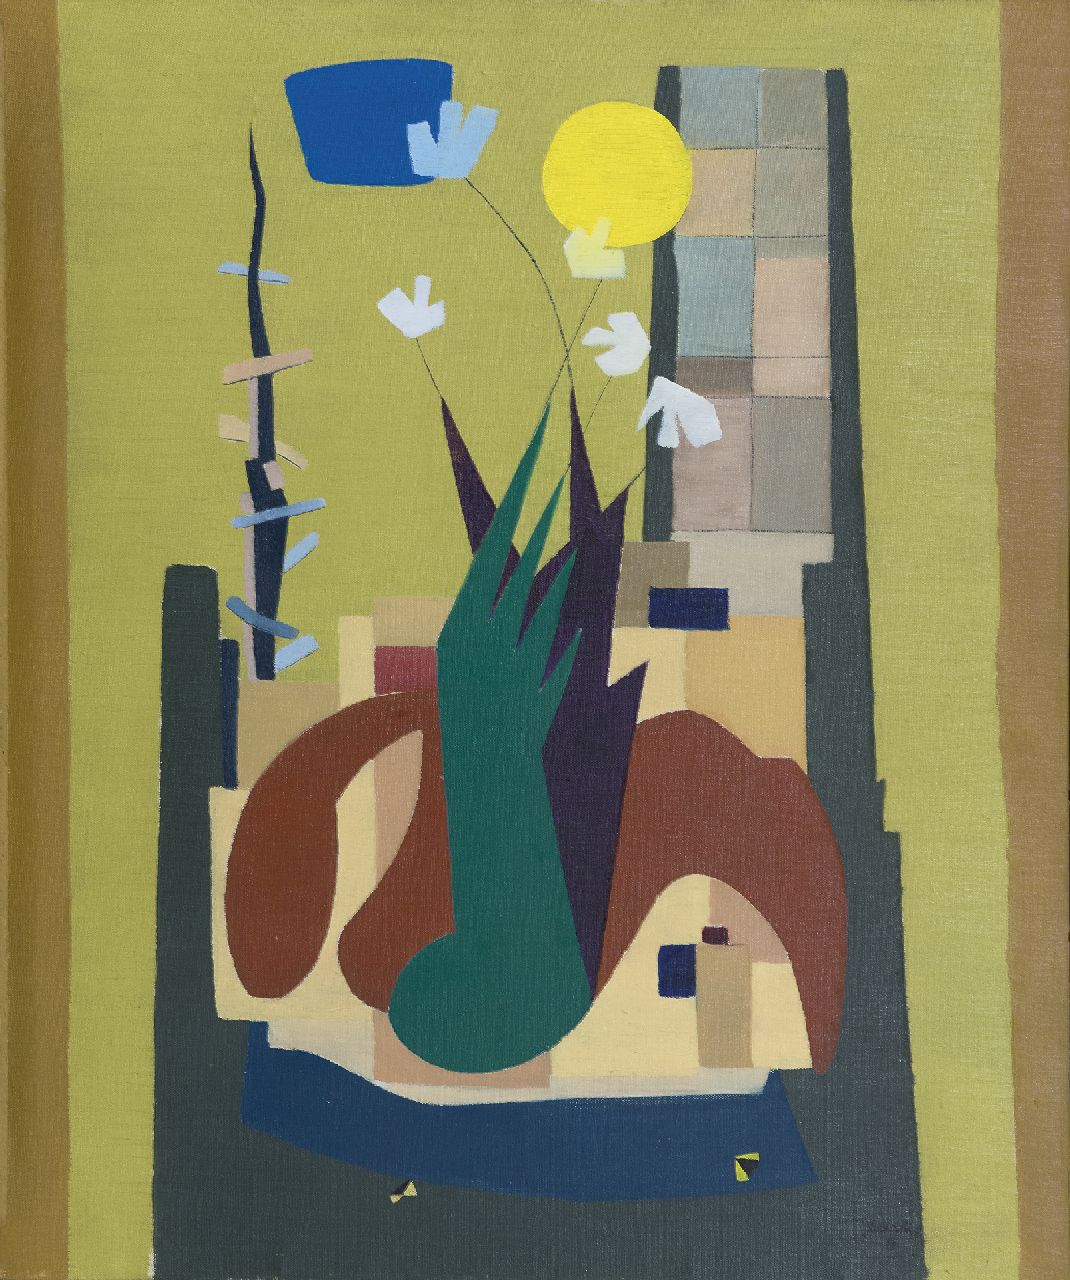 Verbrak J.  | Jef Verbrak | Paintings offered for sale | Composition, oil on canvas 64.9 x 54.0 cm, signed l.r. and painted '53